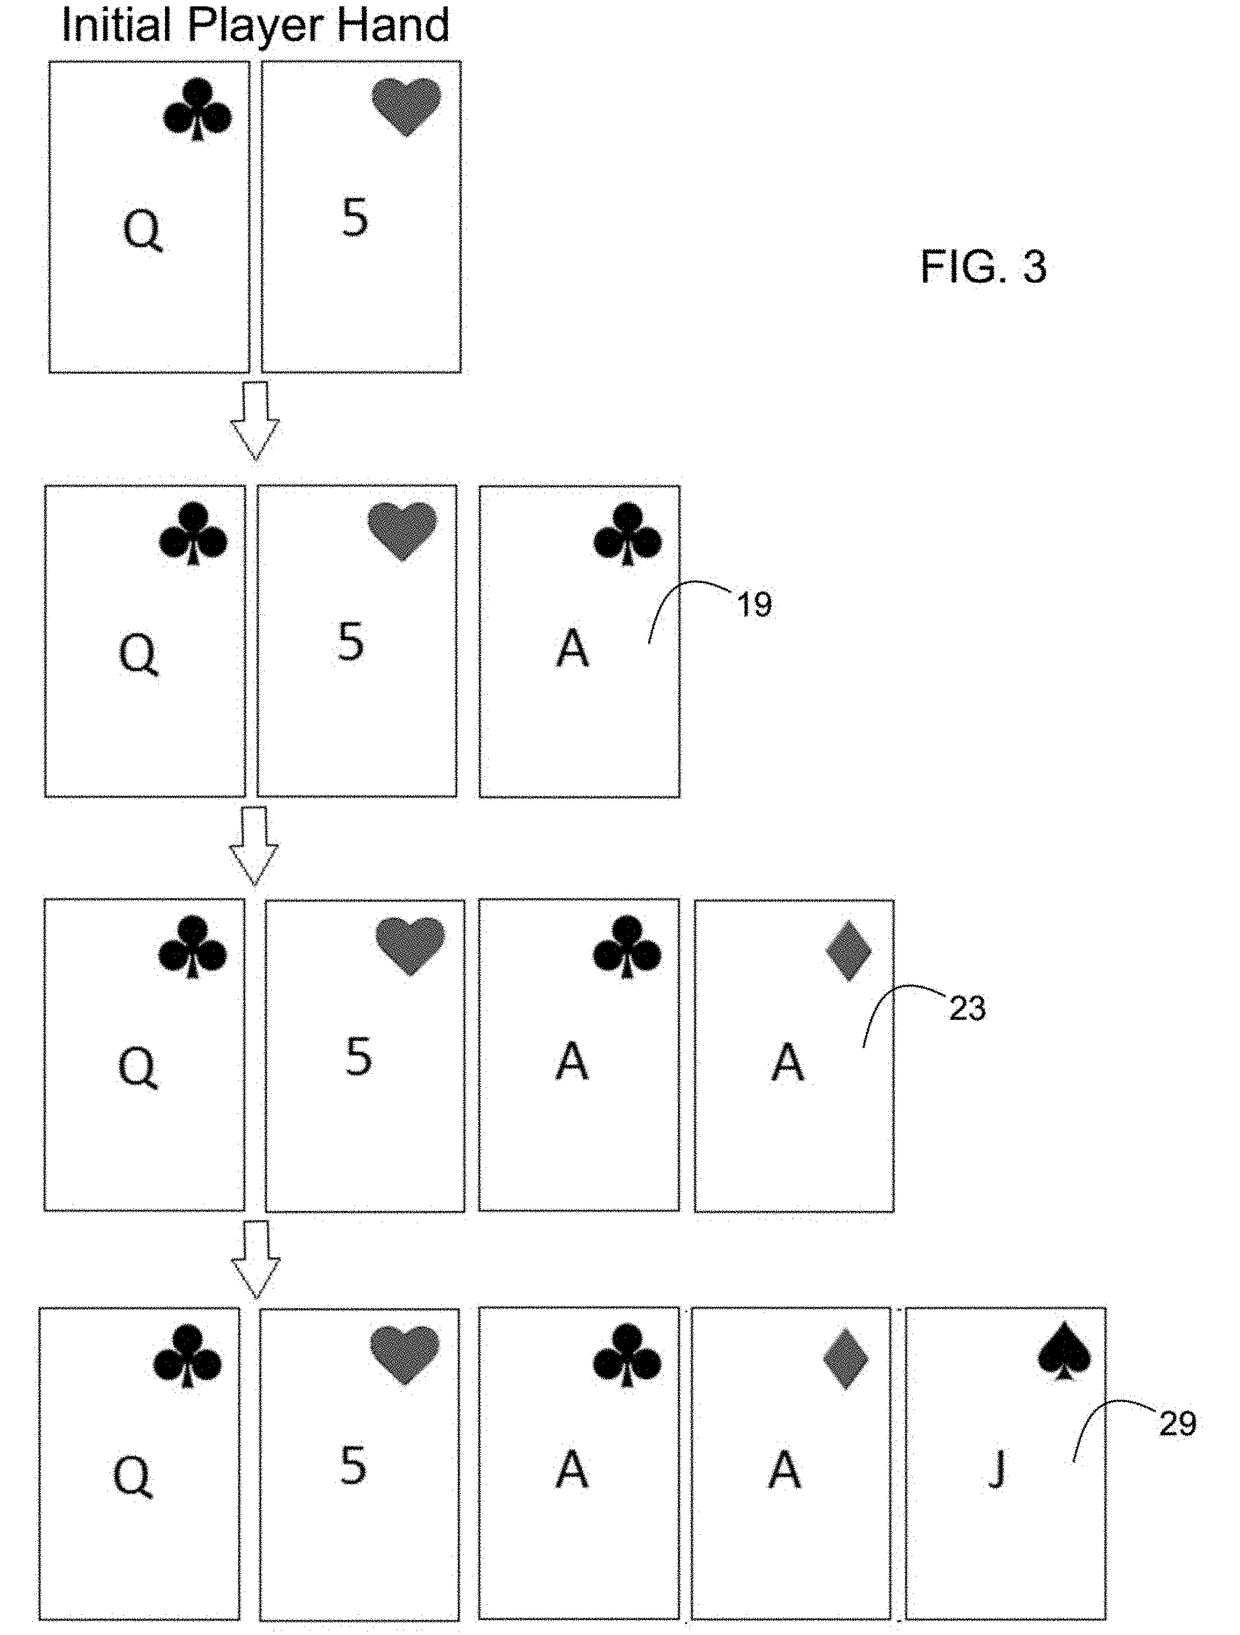 Series of playing card games based on the prediction of a player hand exceeding a numerical value of 21